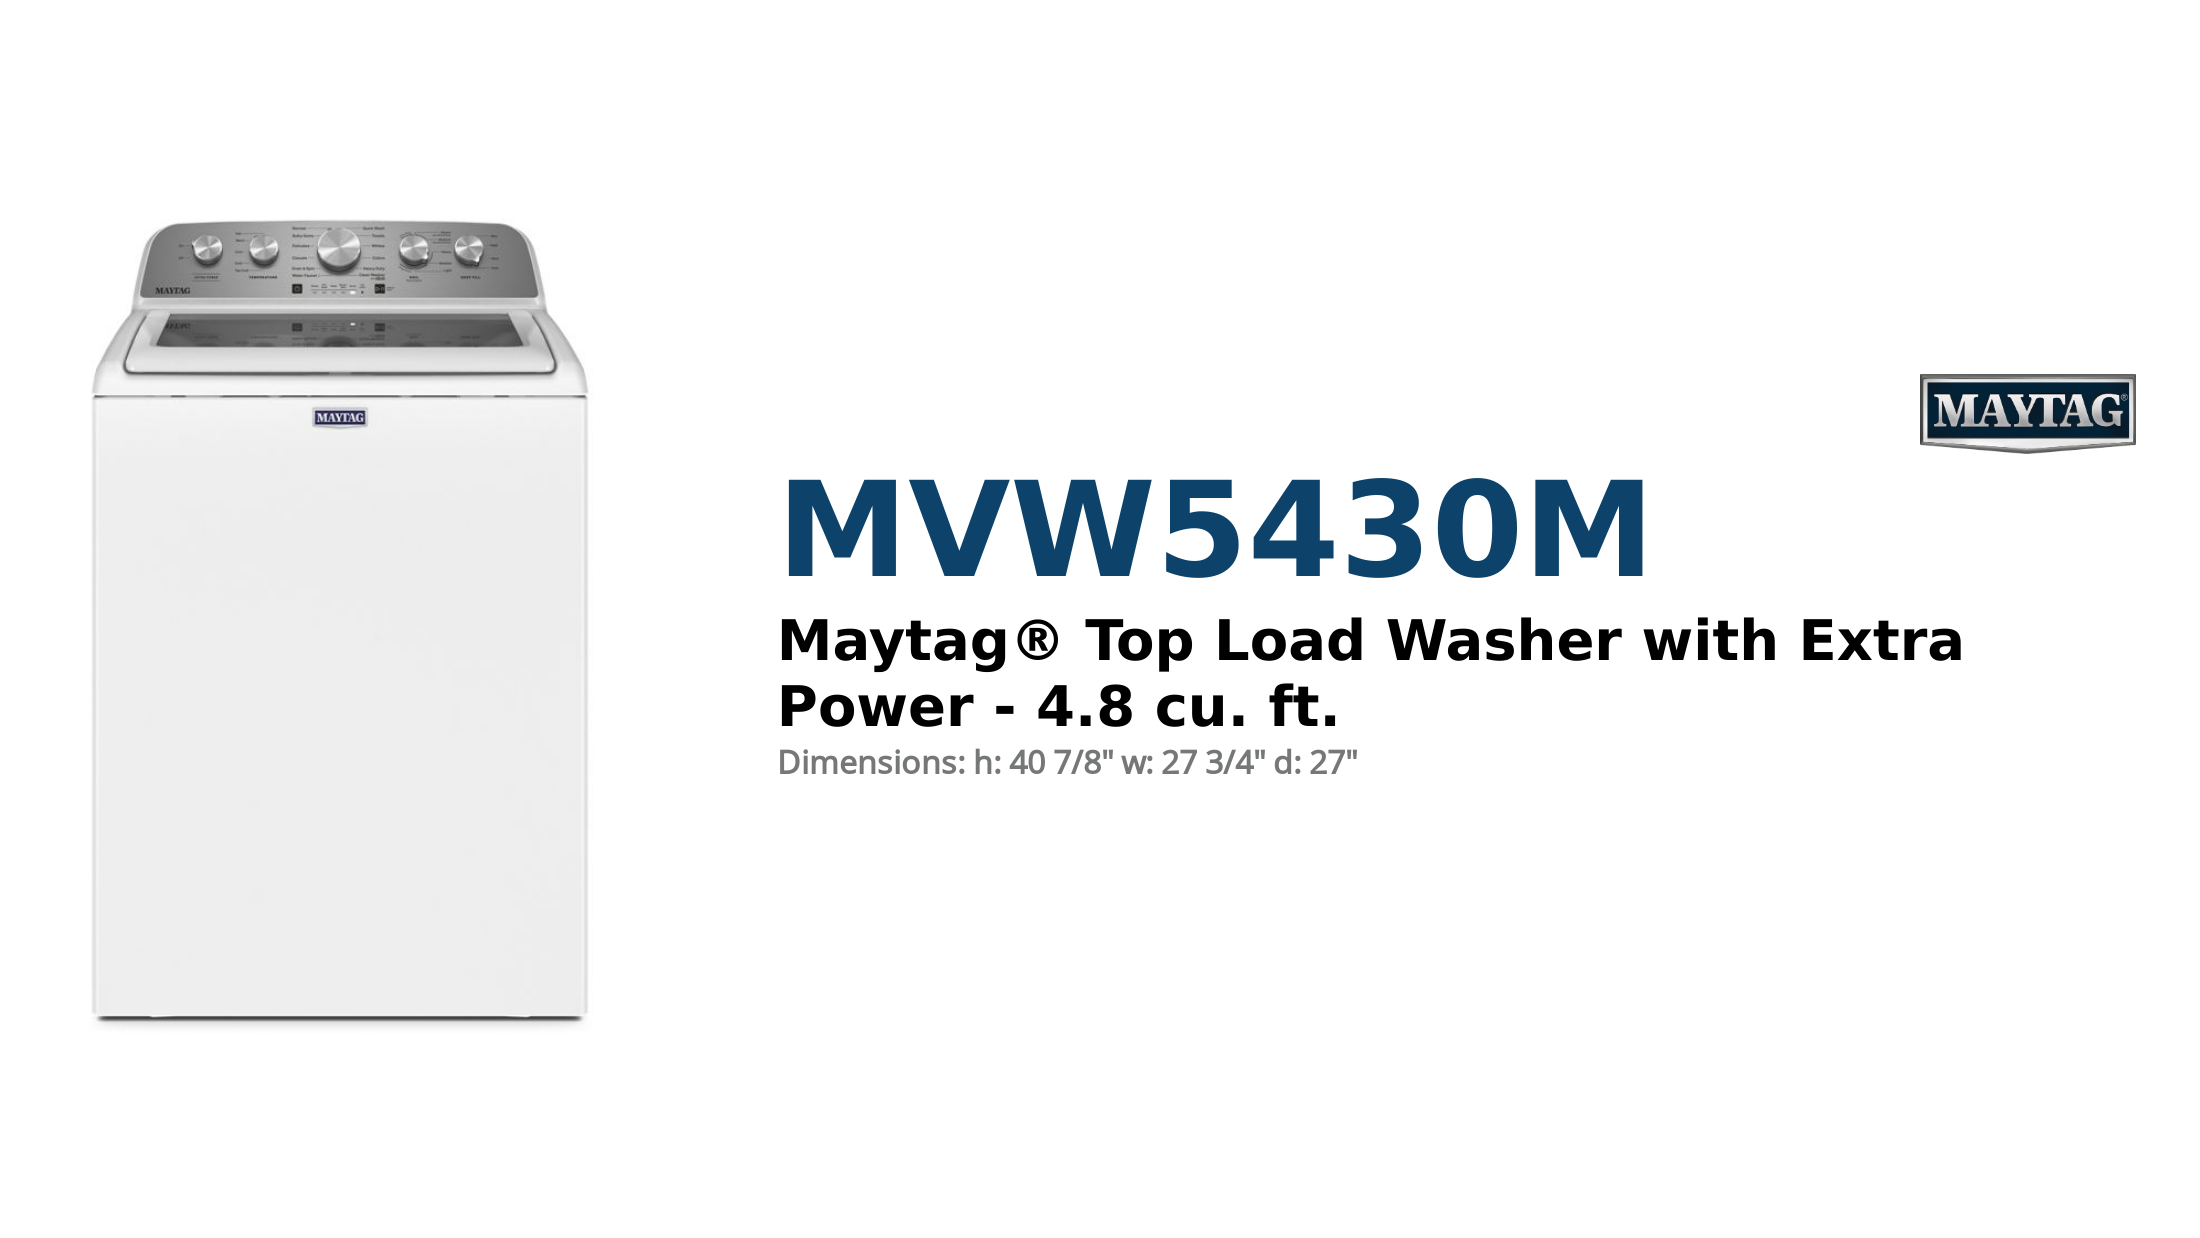 Maytag® Top Load Washer with Extra Power - 4.8 cu. ft.